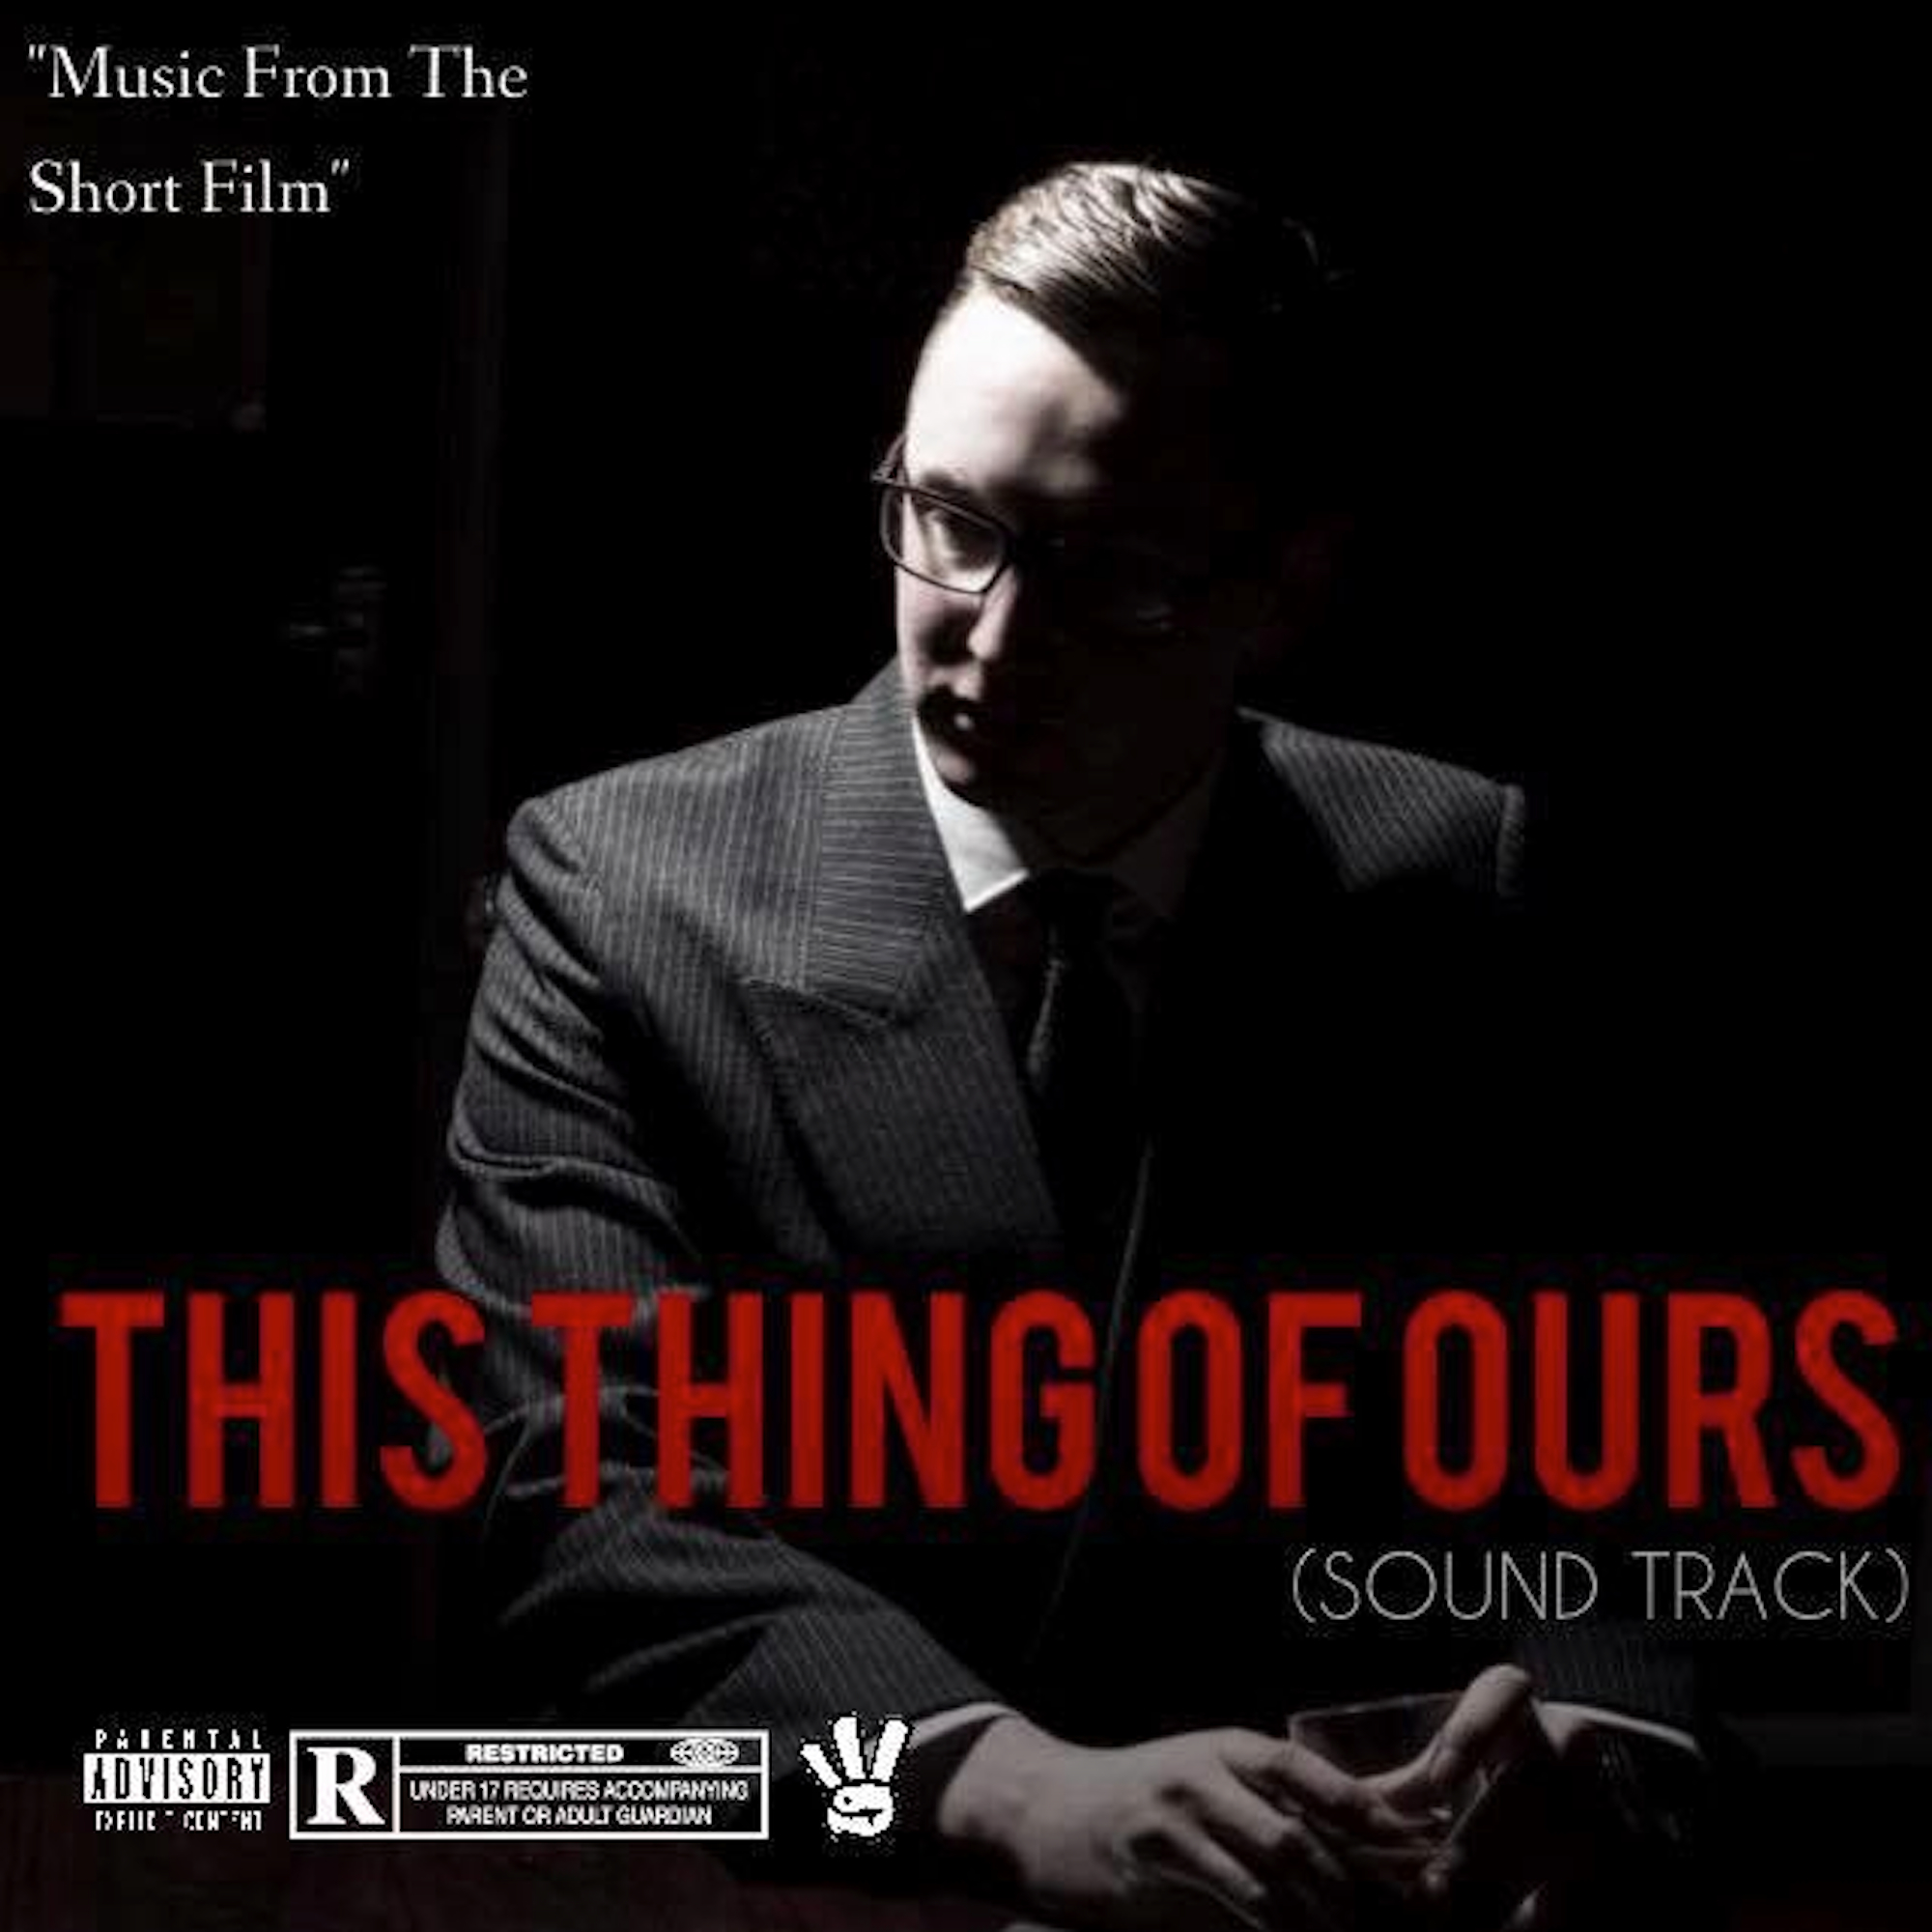 This thing of ours Music from Short Film " This Things of Ours